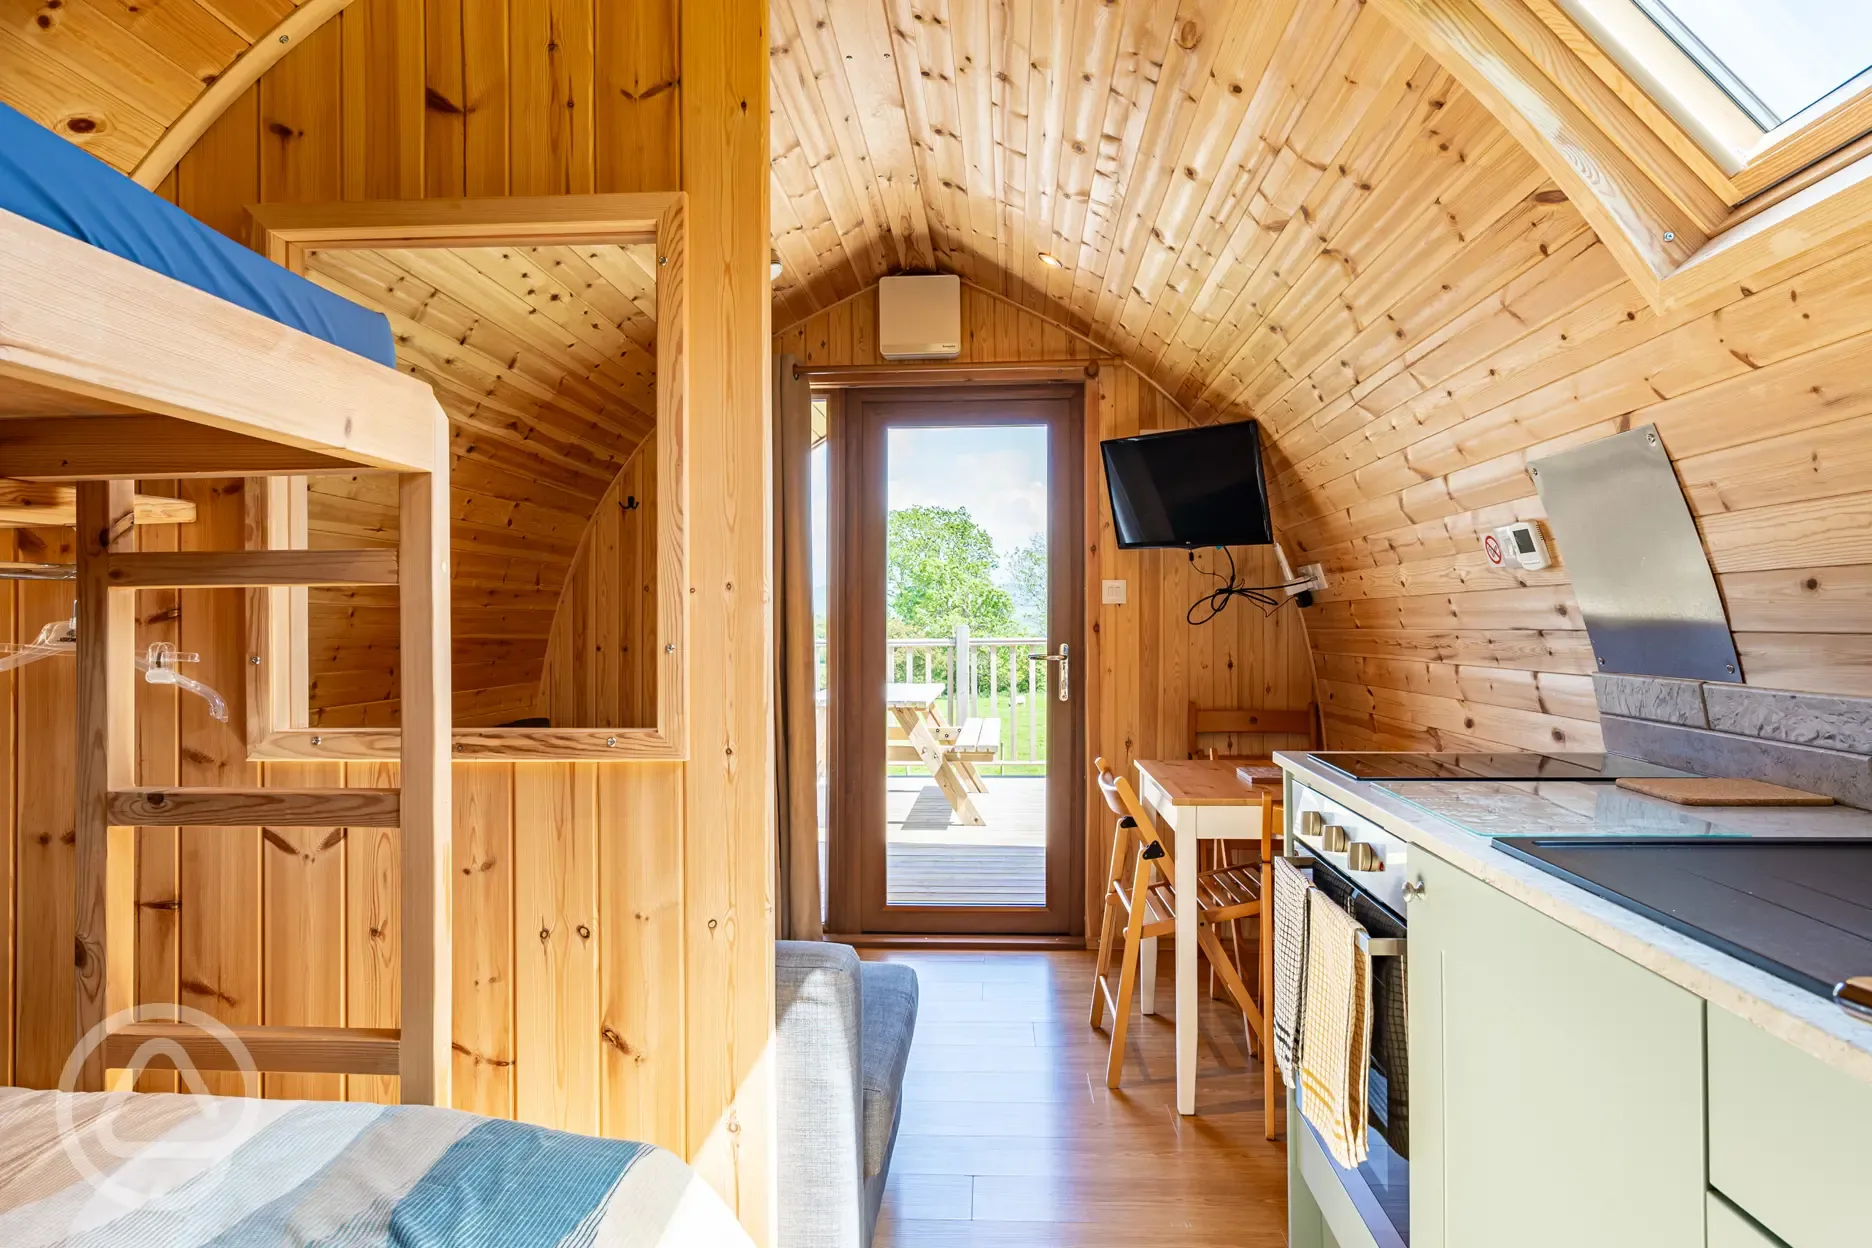 Camping pod with bunk beds interior